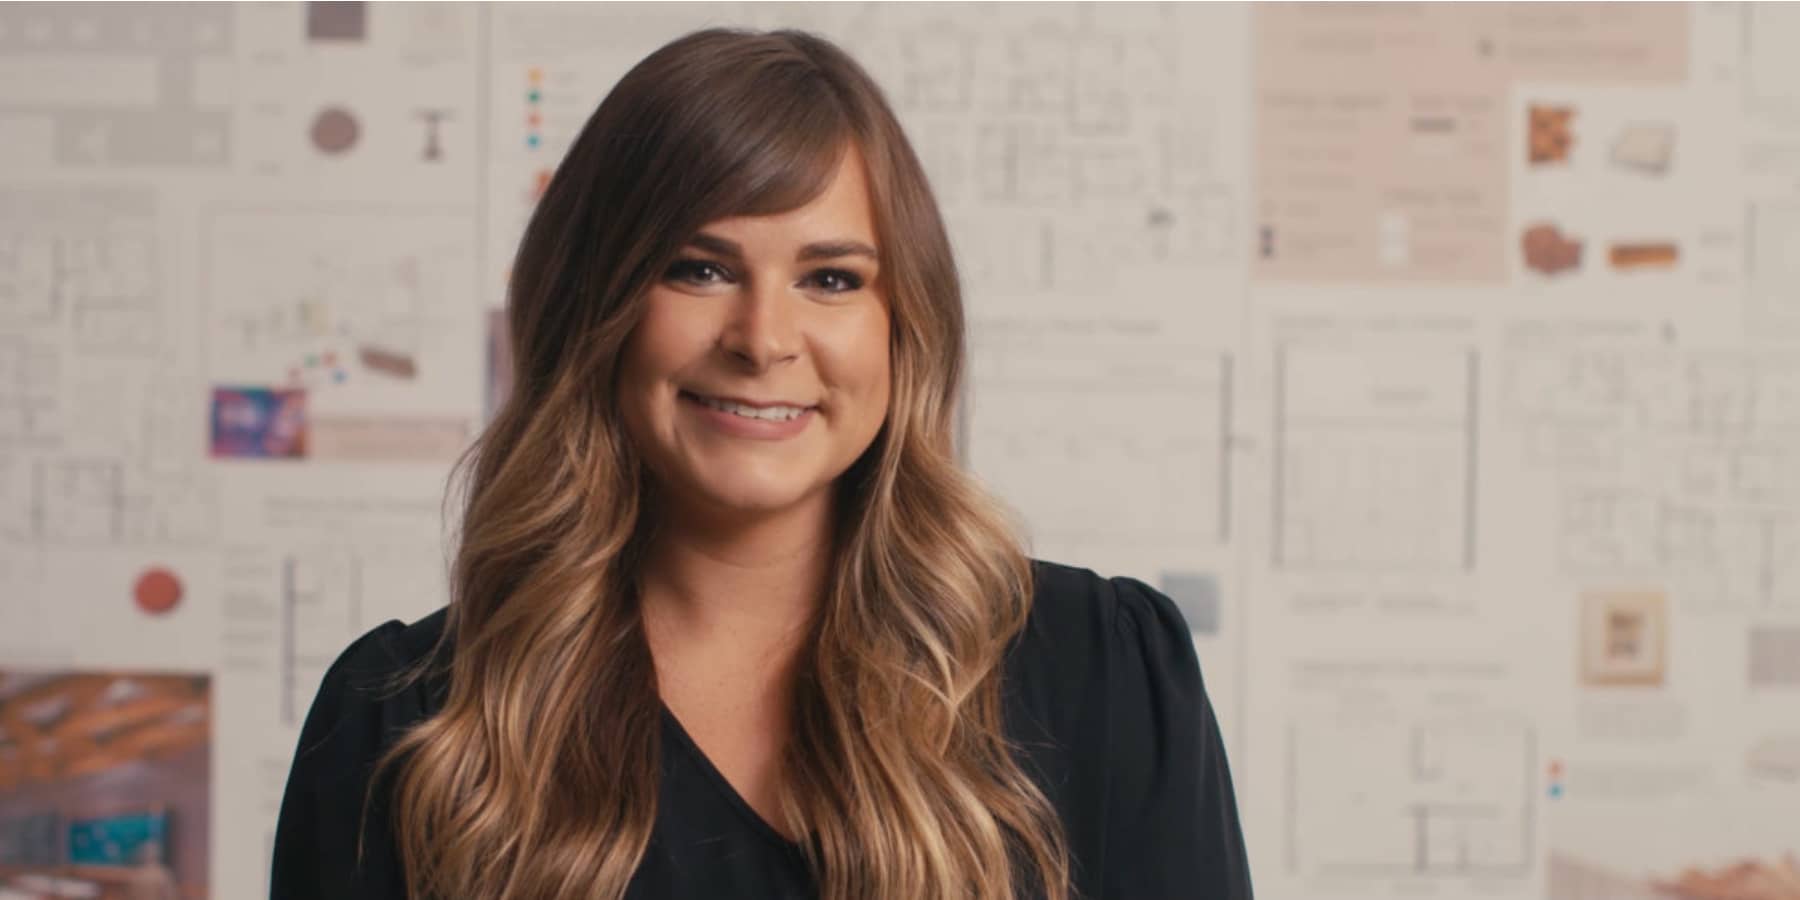 A woman with wavy brown hair poses with interior design sketches and designs behind her. She wears a black dress shirt.